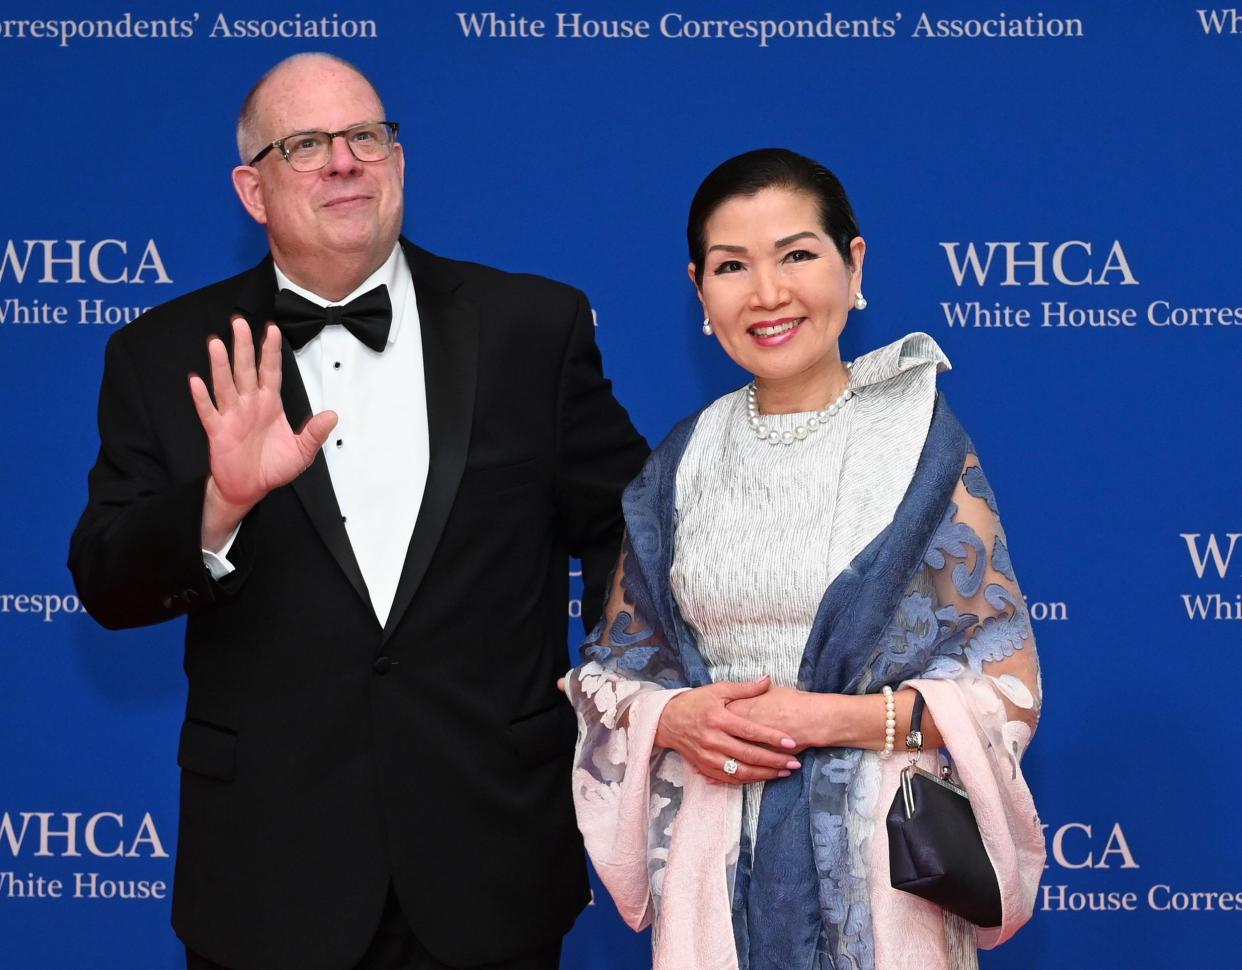 Maryland governor Larry Hogan with his wife, Yumi Hogan: Getty Images